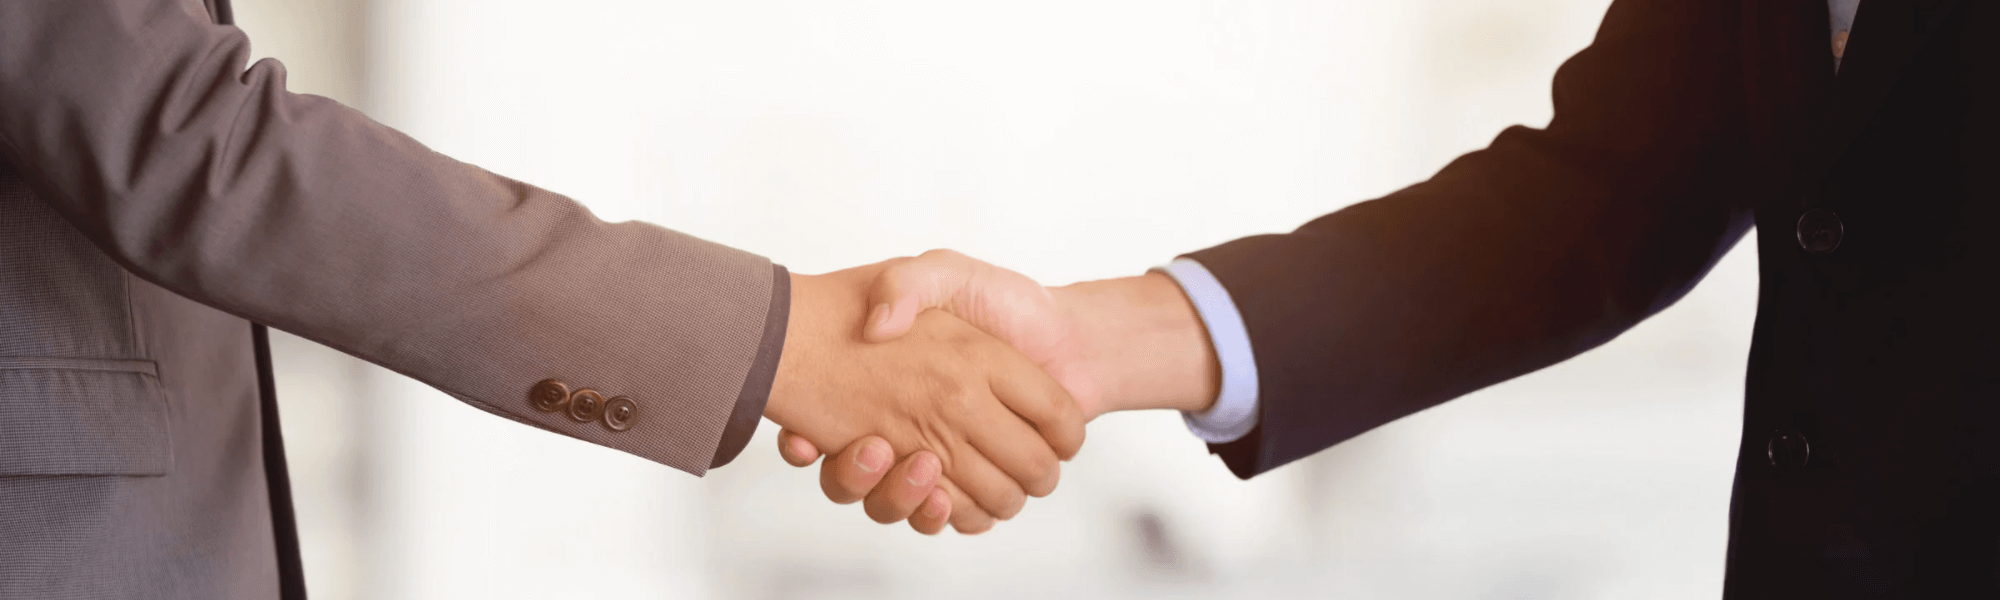 shaking hands1 - Become A Partner